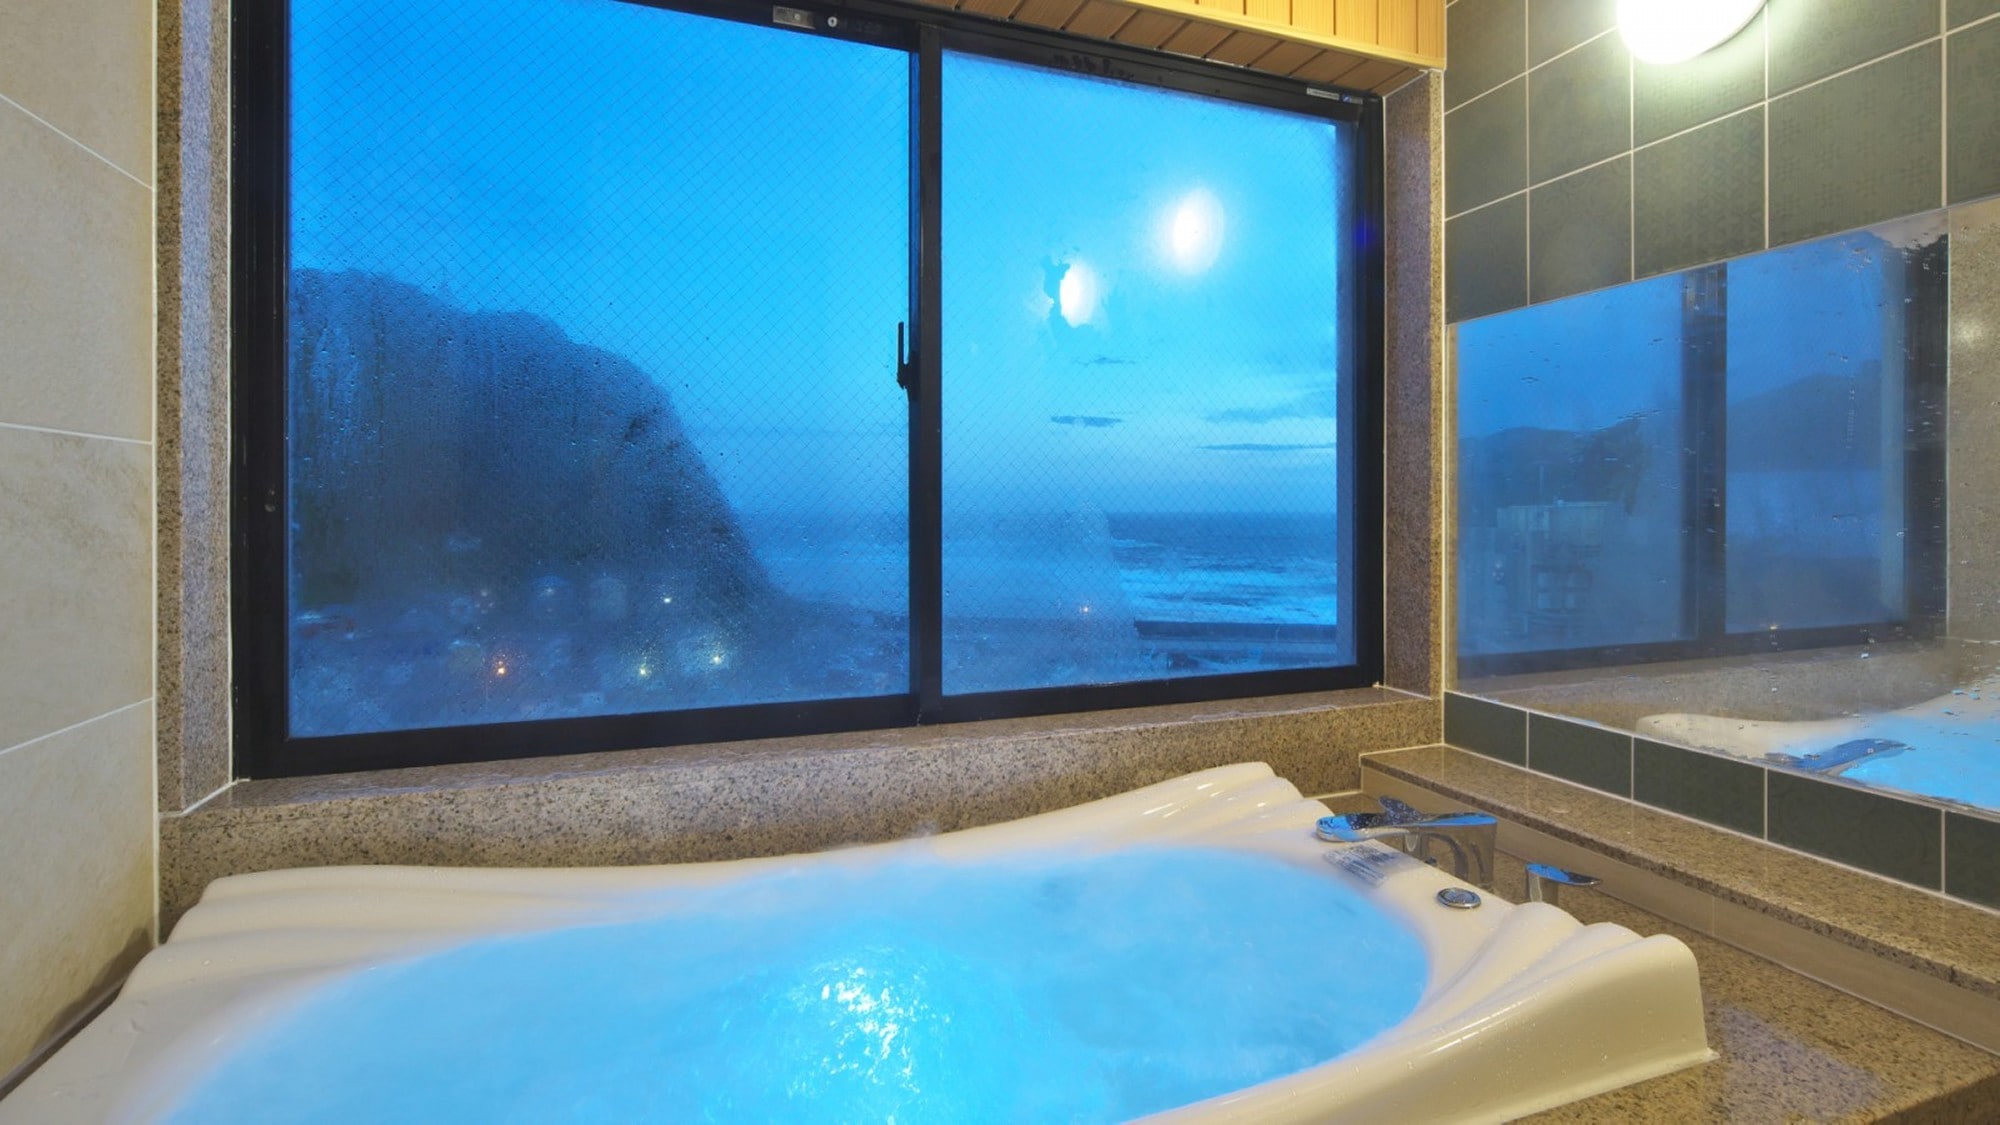 [Kichitei] Excellent view, top floor guest room "Kozuki" <Ocean view> You can overlook the Pacific Ocean from the jet bath tub.